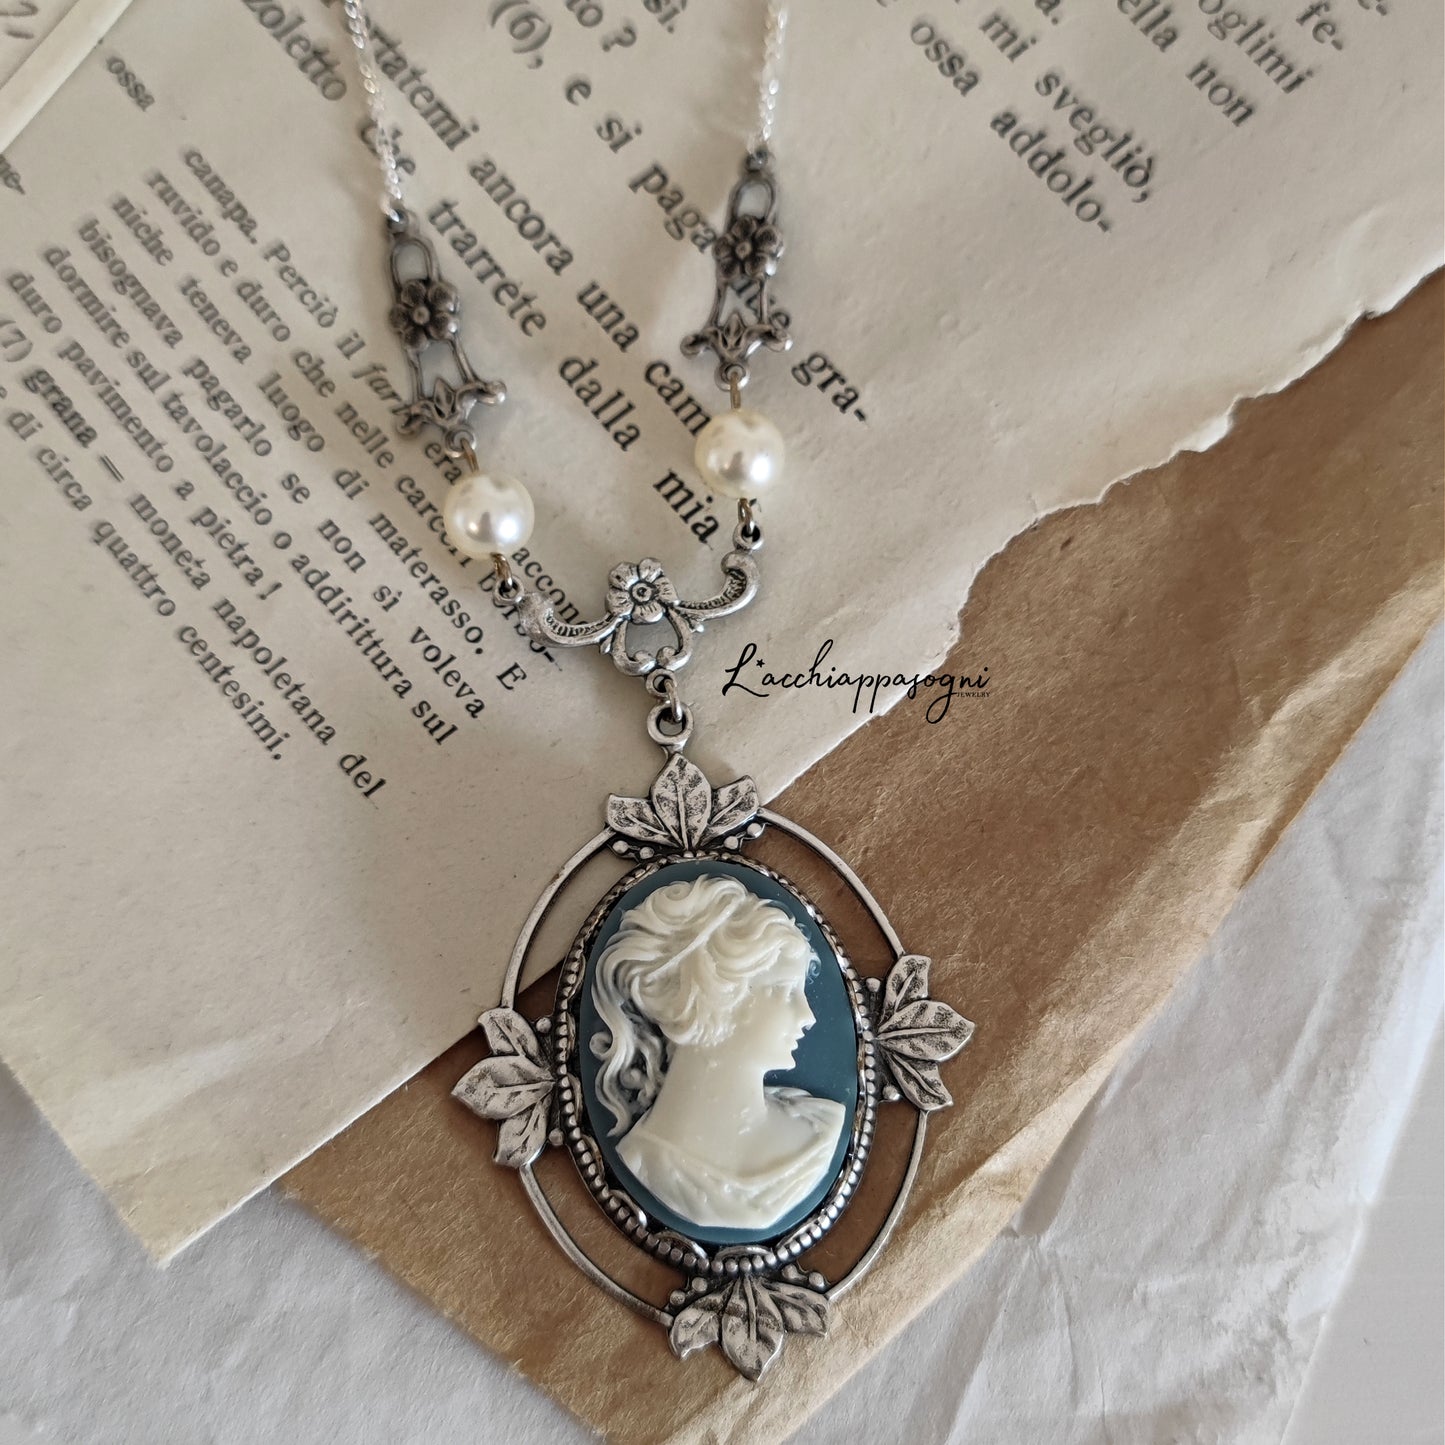 Victorian Cameo Necklace with floral accents, improved silver version